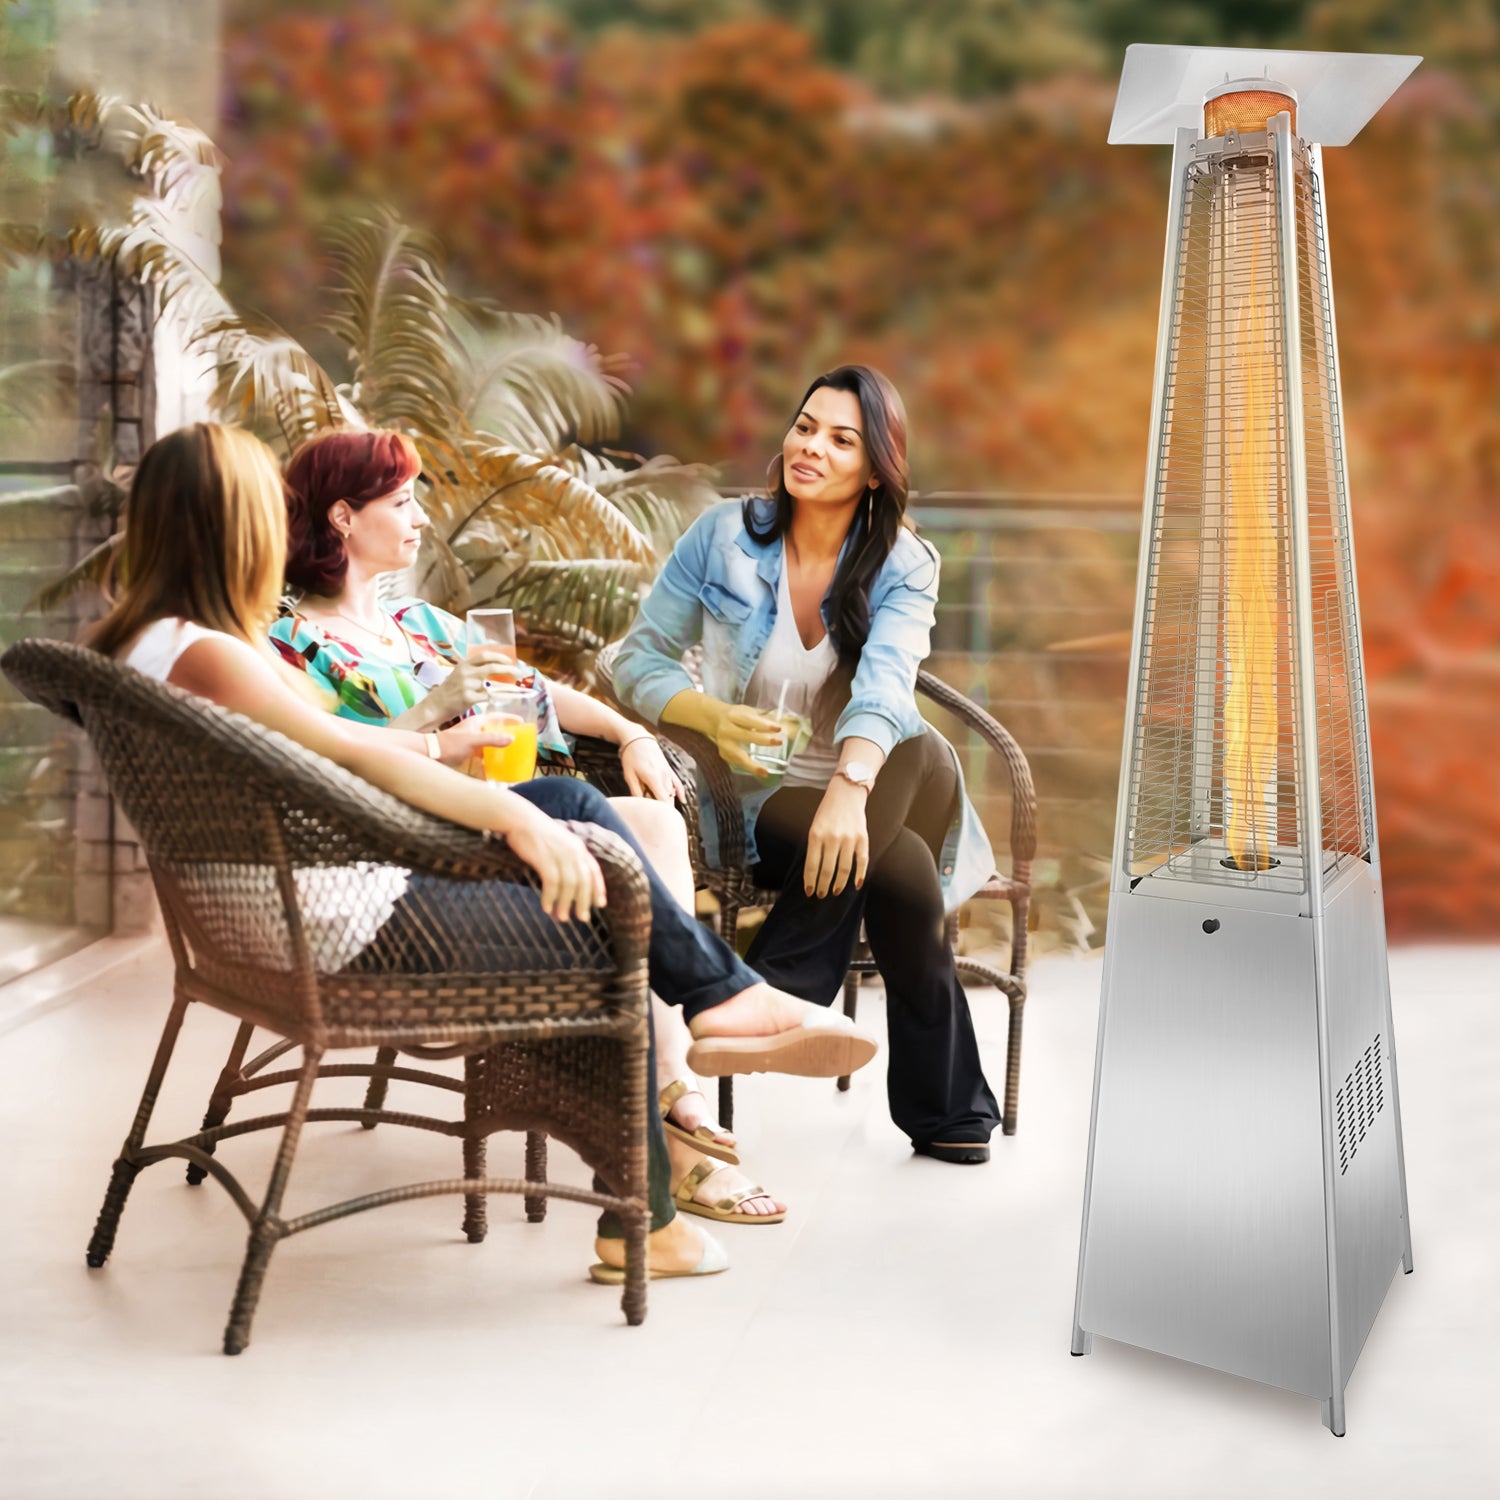 People sitting outdoor beside an electric heater